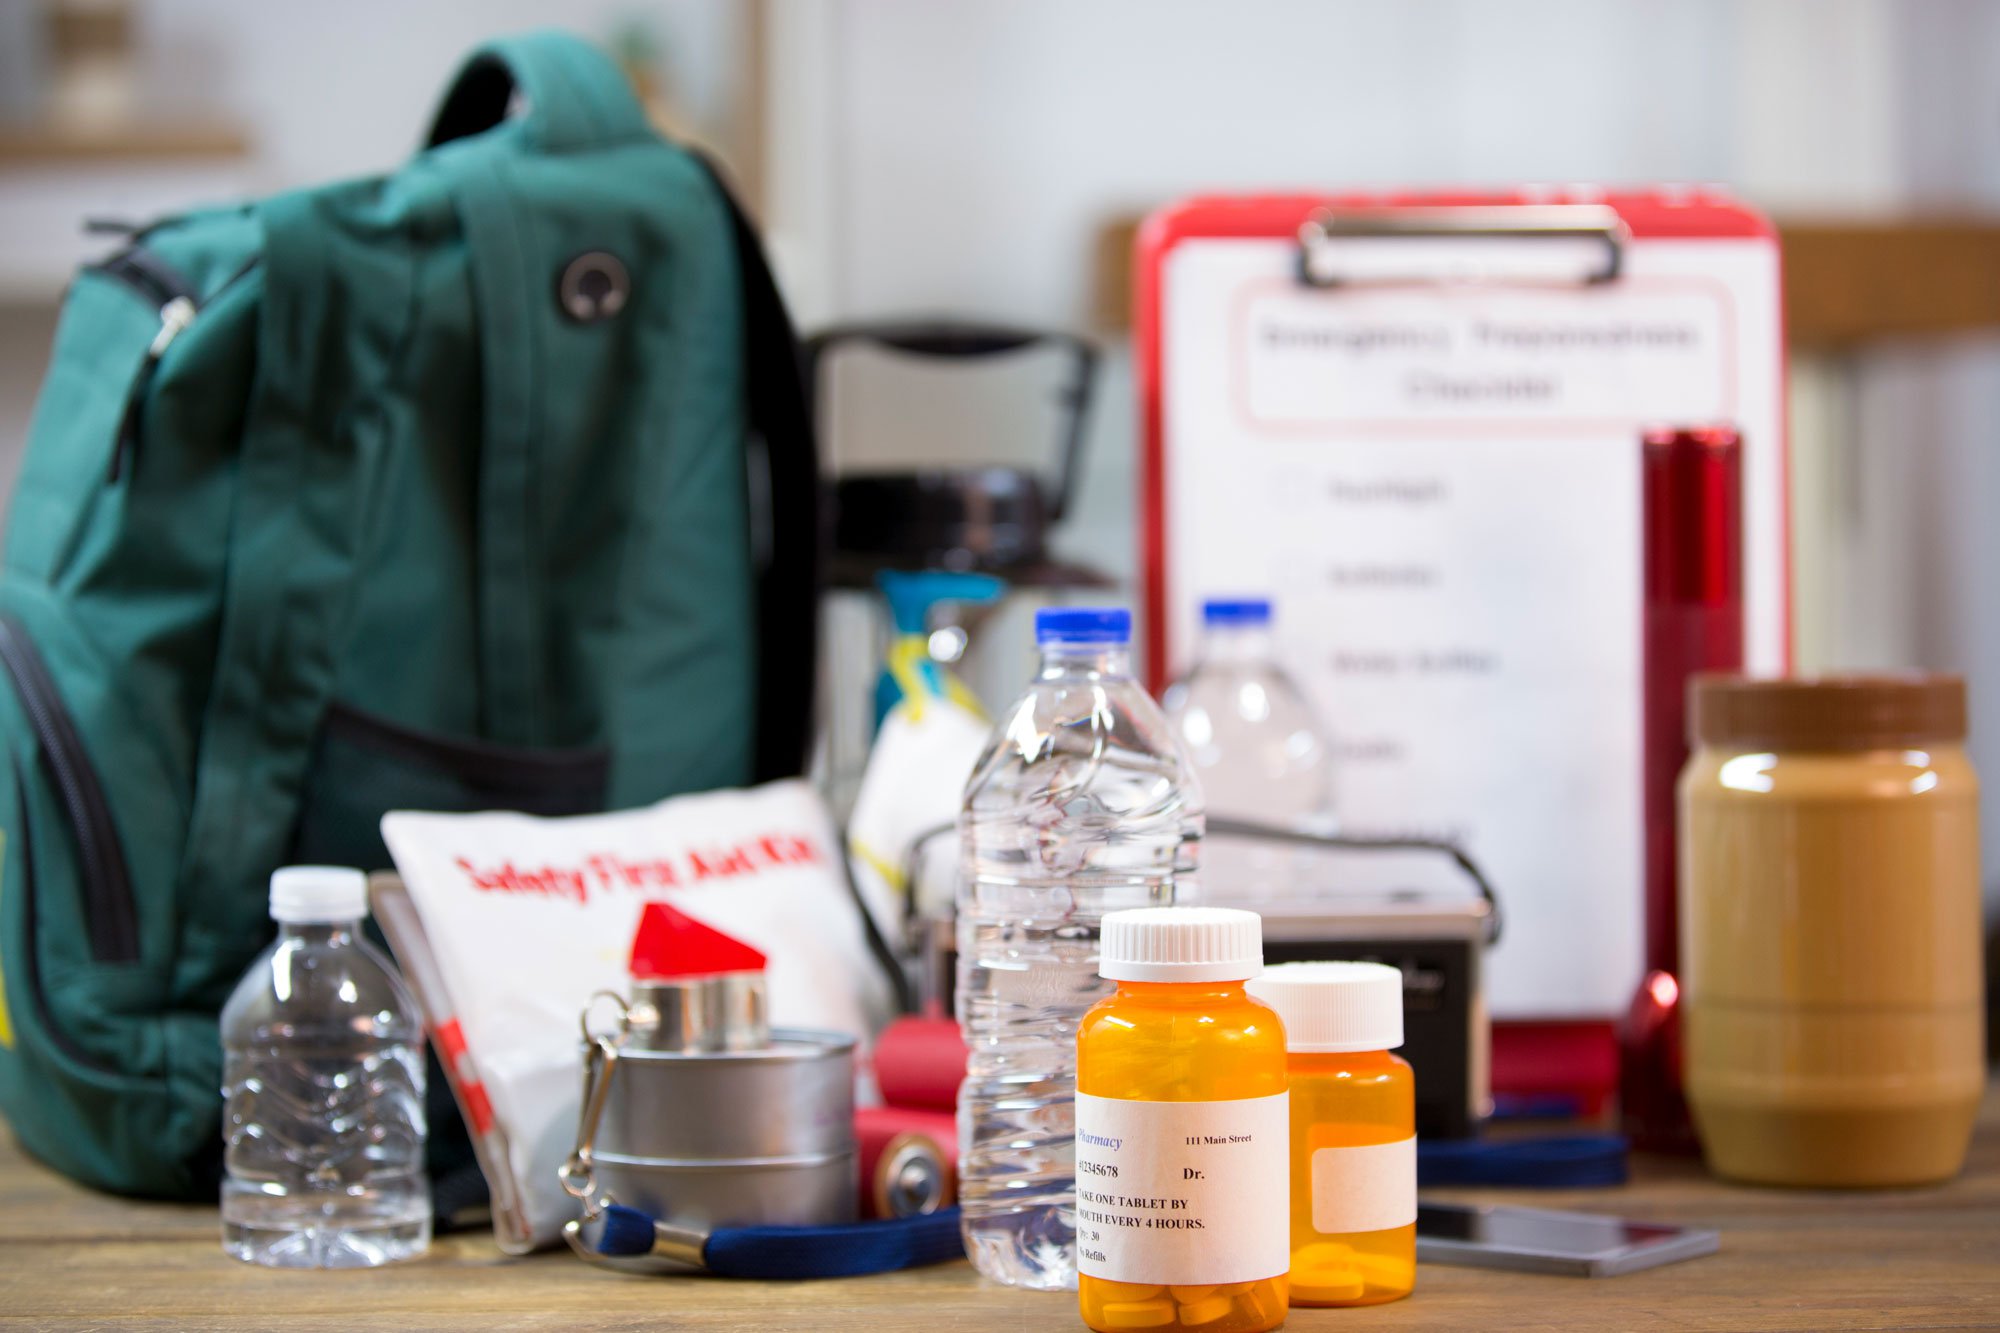 A photo of a collection of emergency supplies including water bottles, a flashlight, a backpack, medicine bottles, etc.